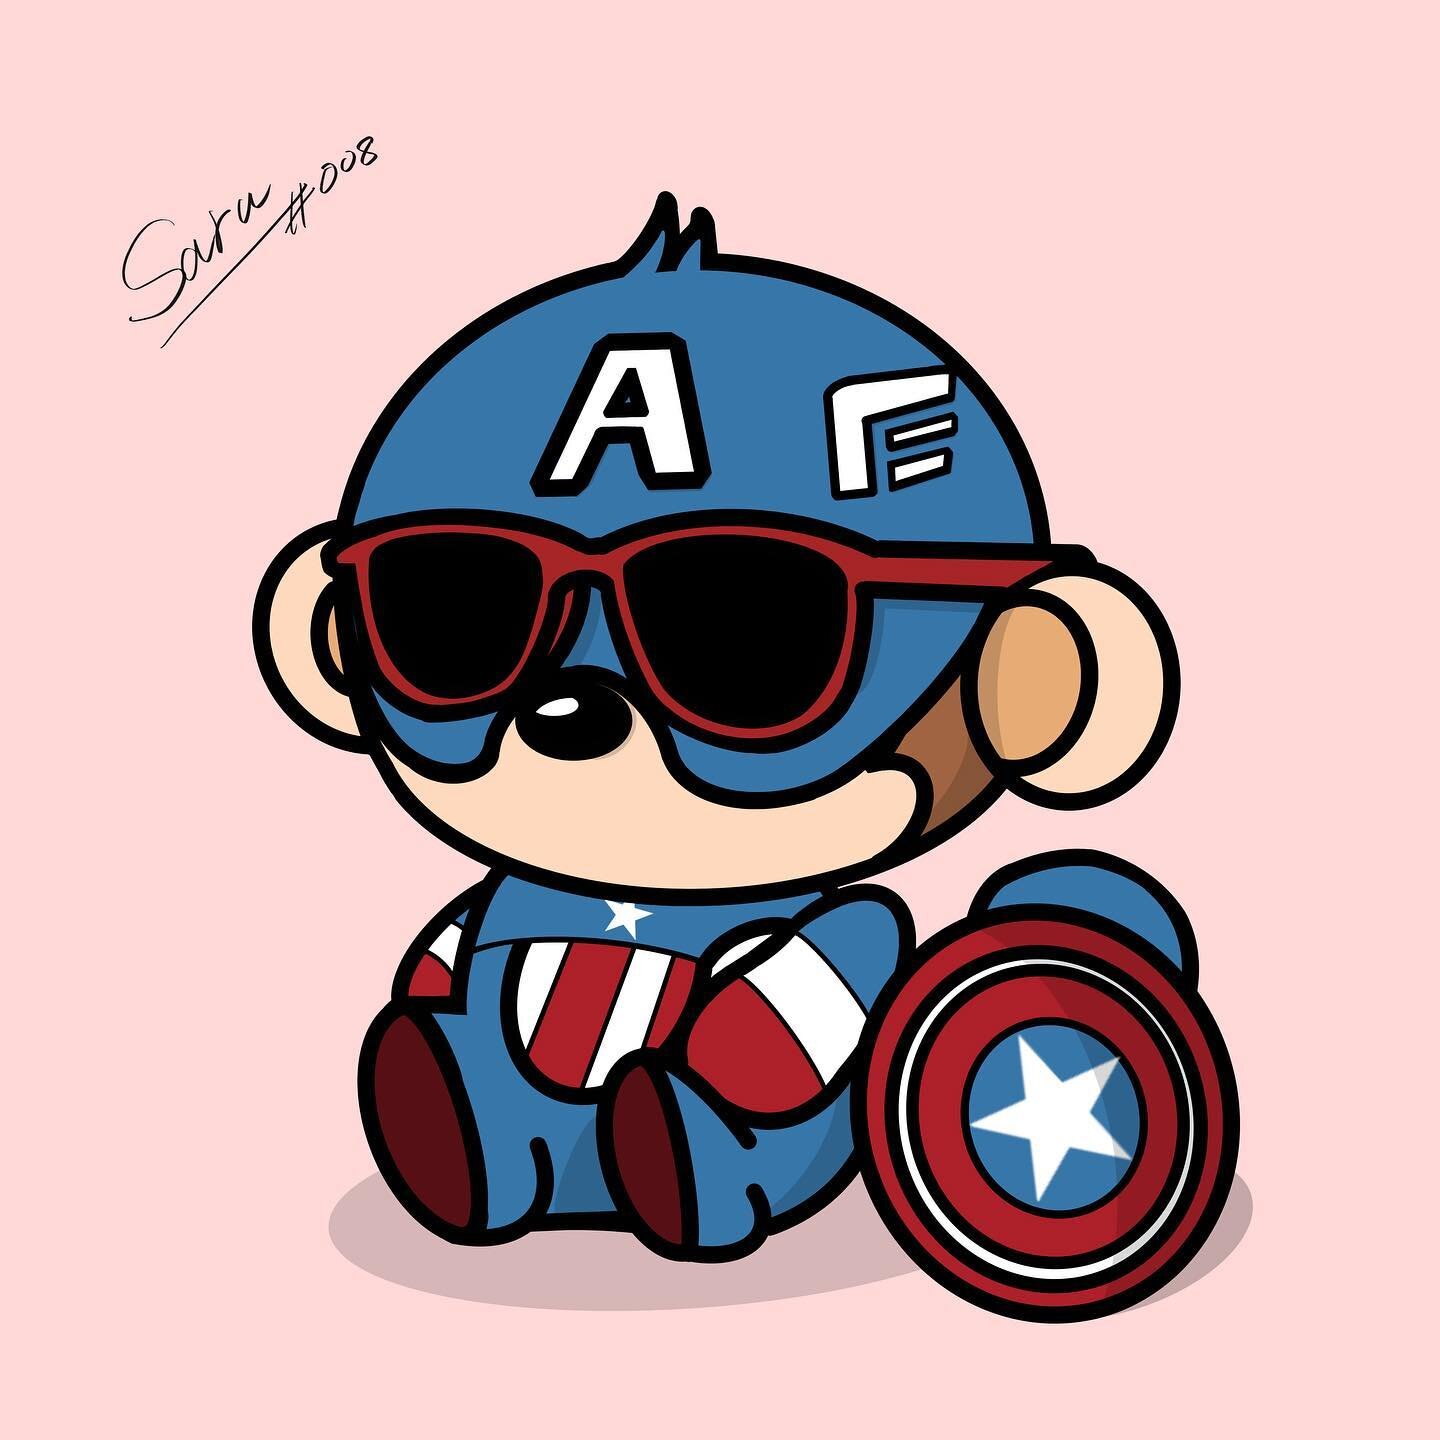 Captain Amesaru #008 by @Sarupto 

Will be dropped on @opensea

Just follow and wait for announcement.

#NFTs #nftart #nftcollector #monkey #saru #illustrationart #cryptoart #marvelstudios #captainamerica All Respects for my favorite actor @chrisevan